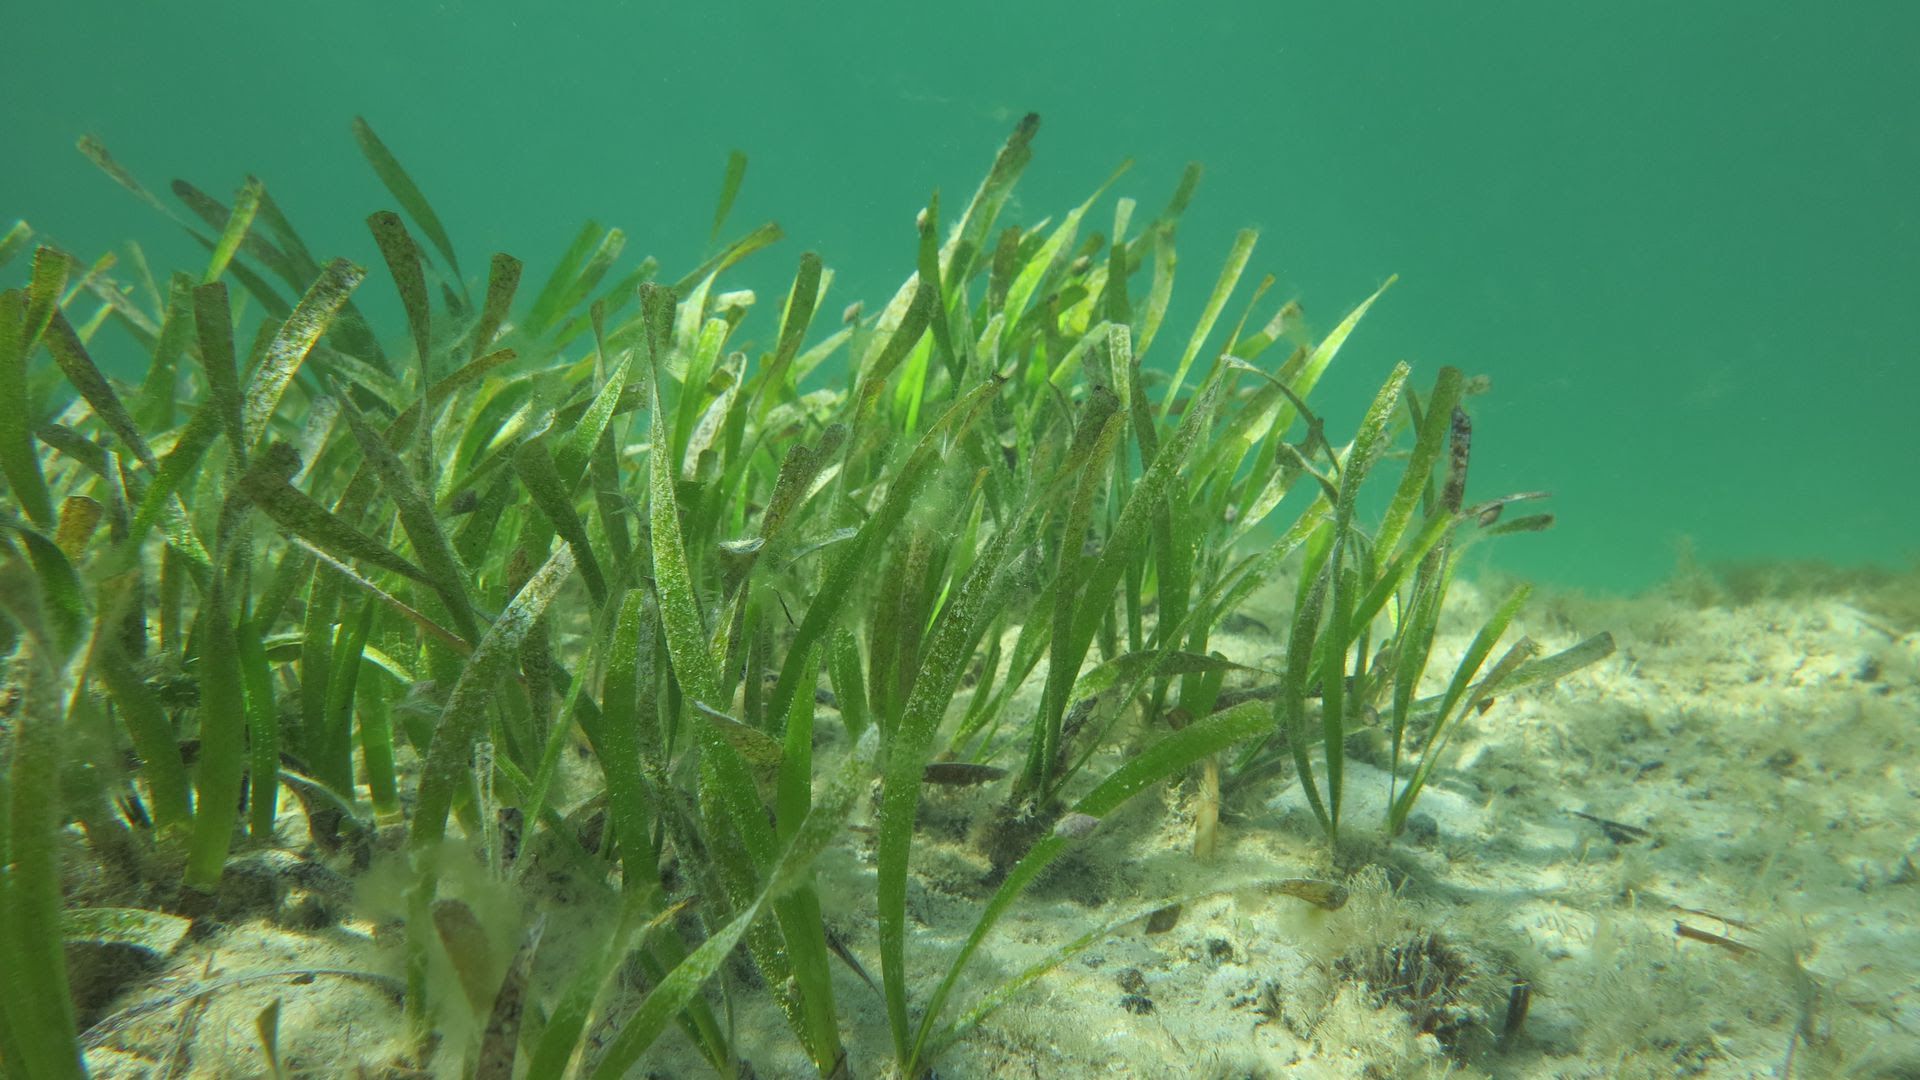 A seagrass meadow. Photo: Centre for Marine Ecosystems Research at Edith Cowan University